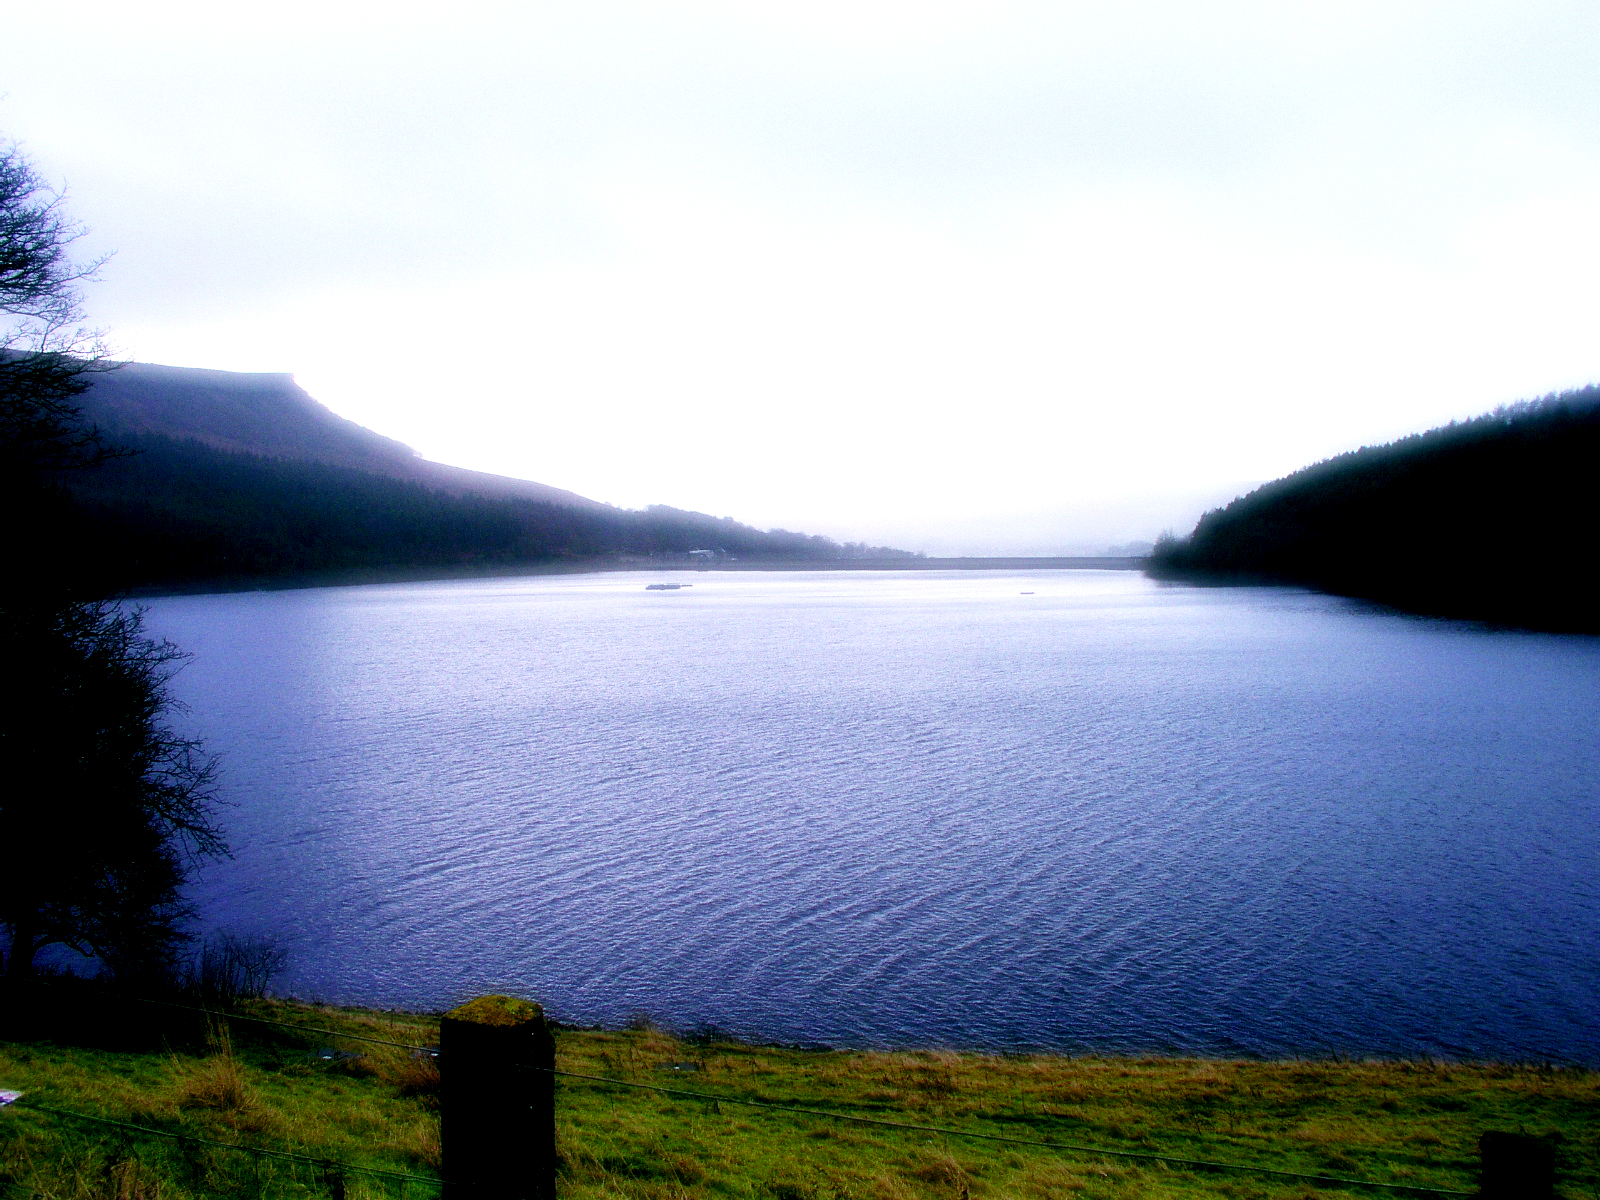 a large body of water surrounded by hills